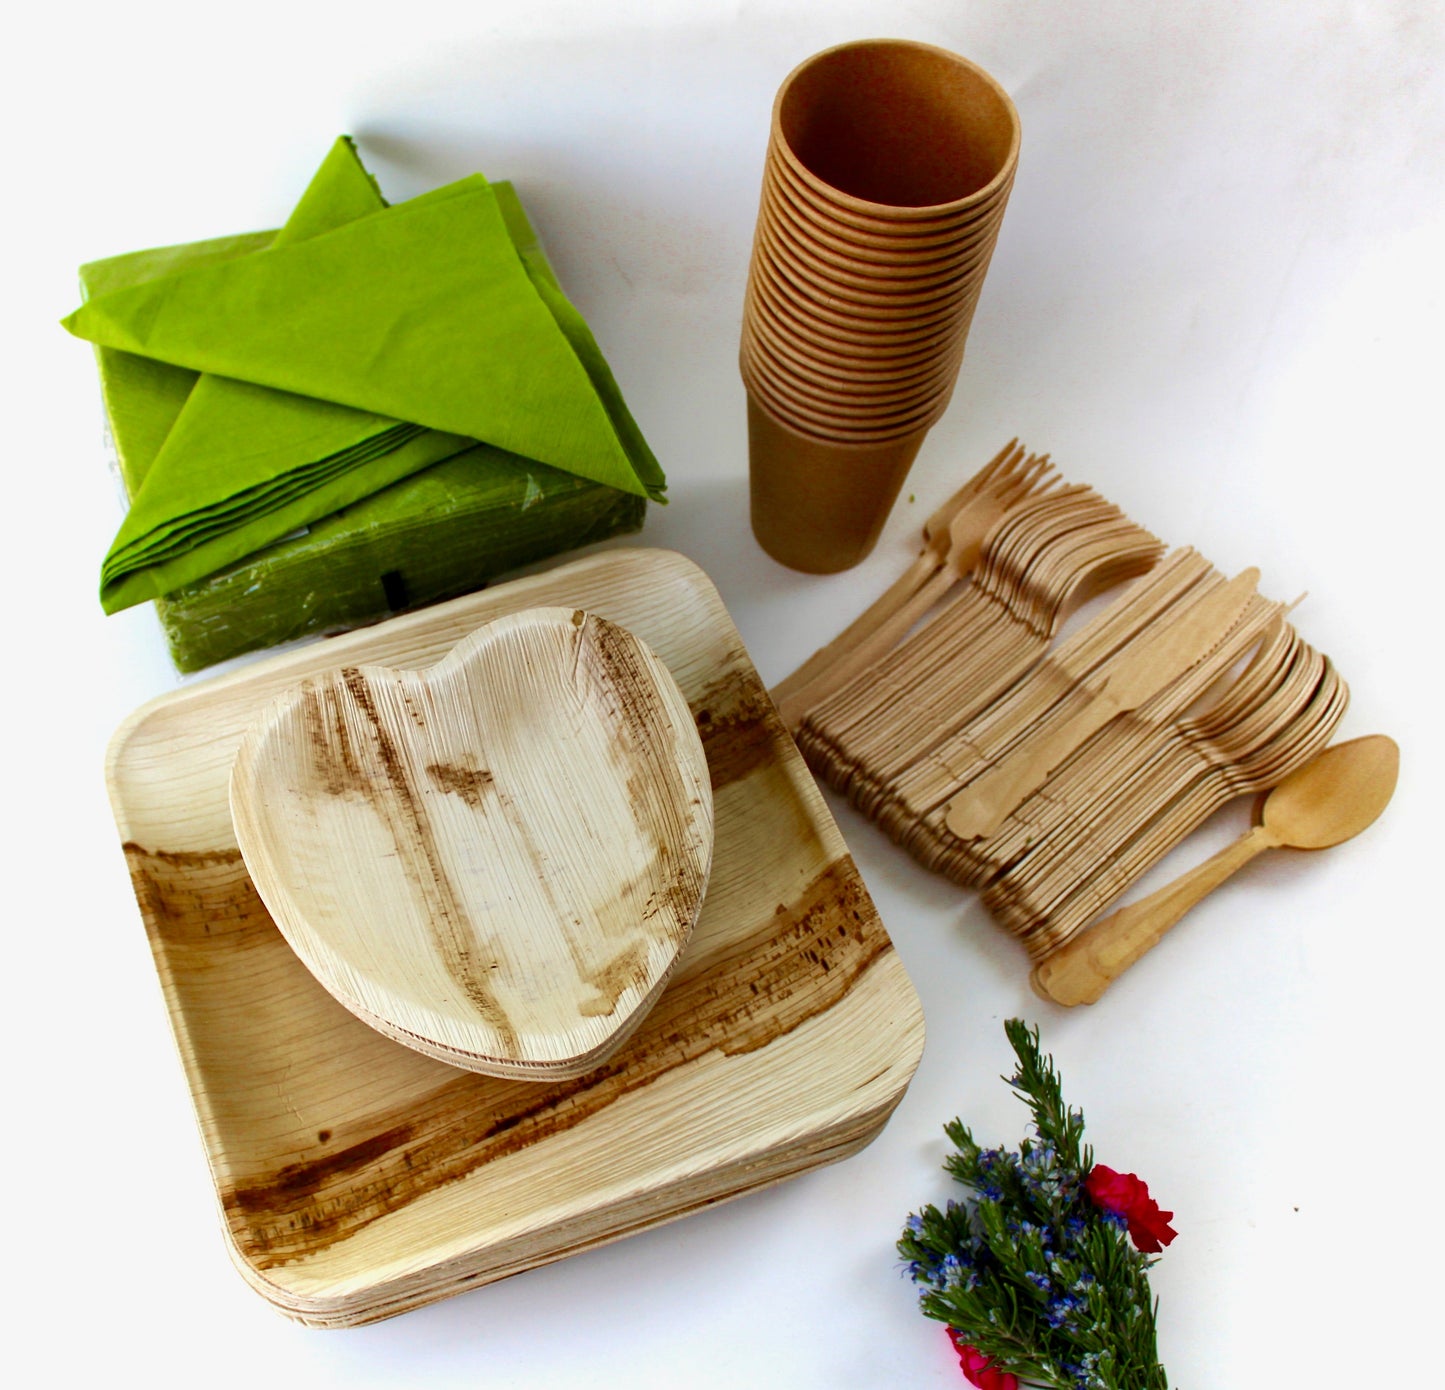 Bamboo Type Palm Leaf 25 Pic 10"Square  - 25 pice  6" Bowl deep  - 25  pic  cup  - 75 pic Cutlery - 50 Pic Napkin